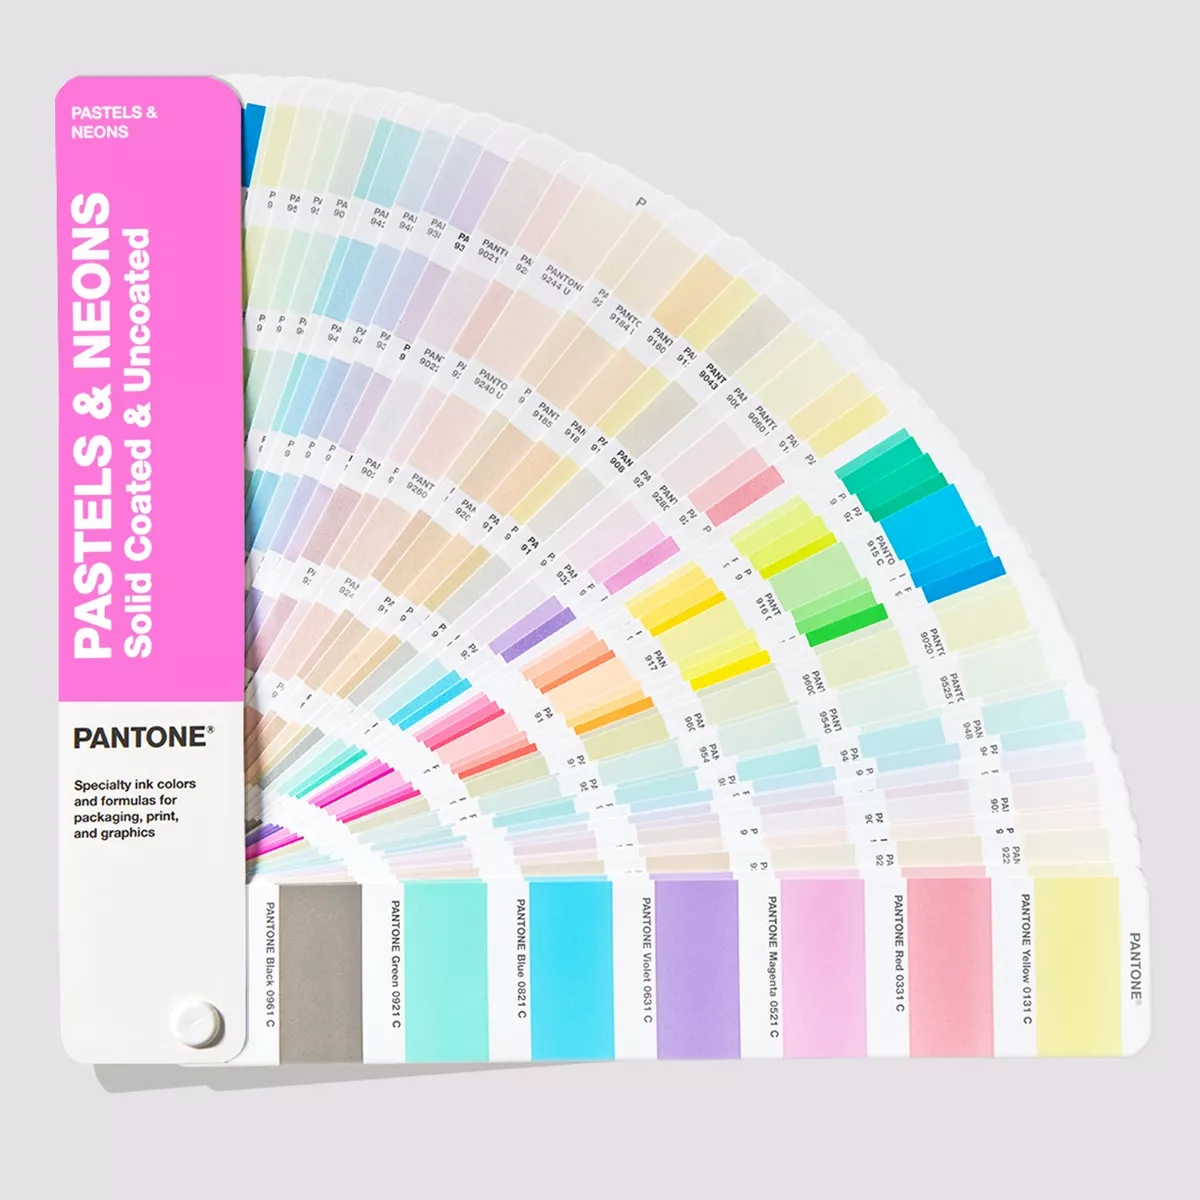 PANTONE Pastels & Neons Guide Coated & Uncoated 1